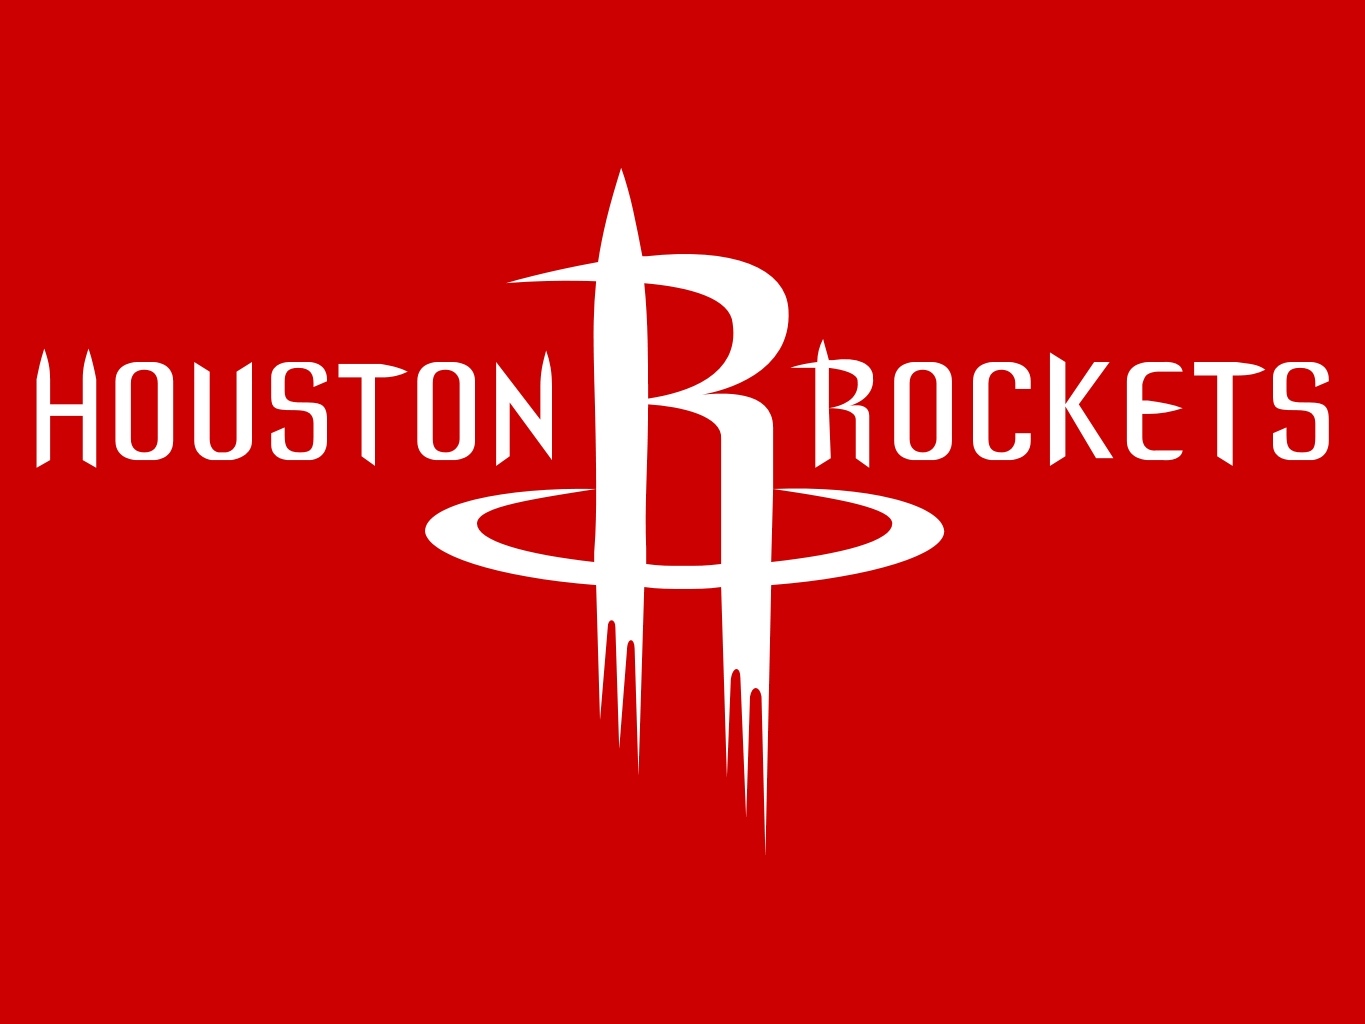 Houston Rockets PHOTO COLLECTION Players Wallpaper Rocket Logos and